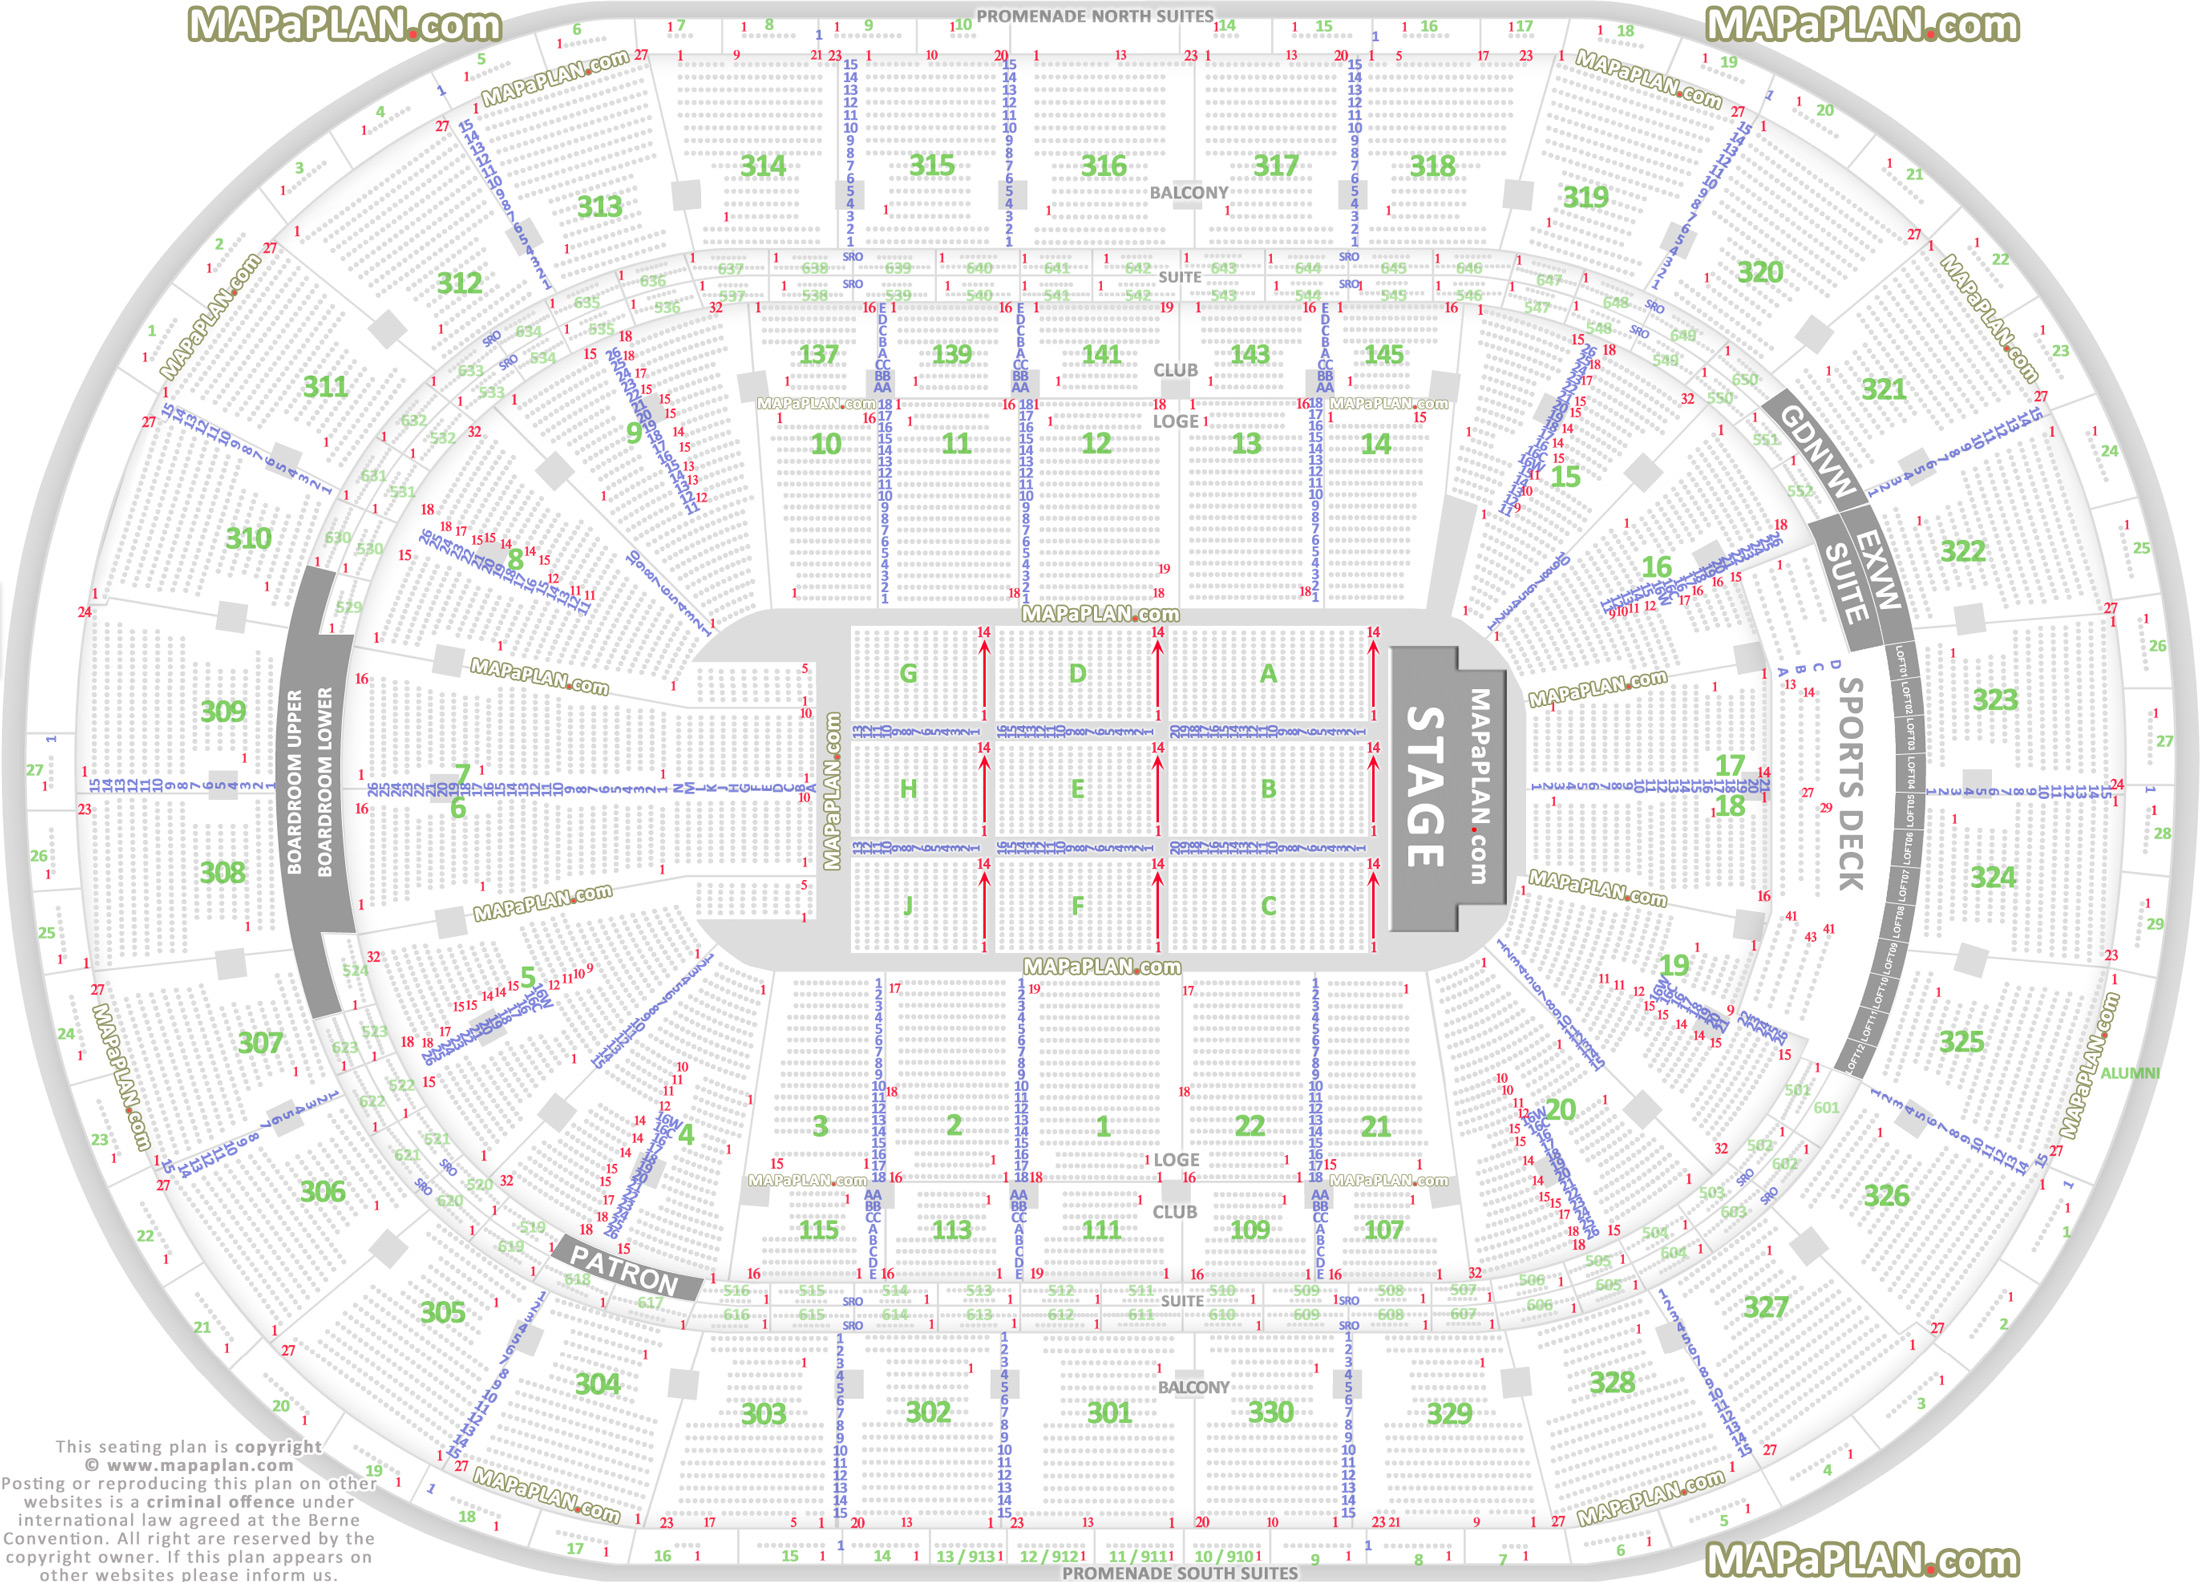 Square Garden Seating Chart With Seat Numbers For Concerts